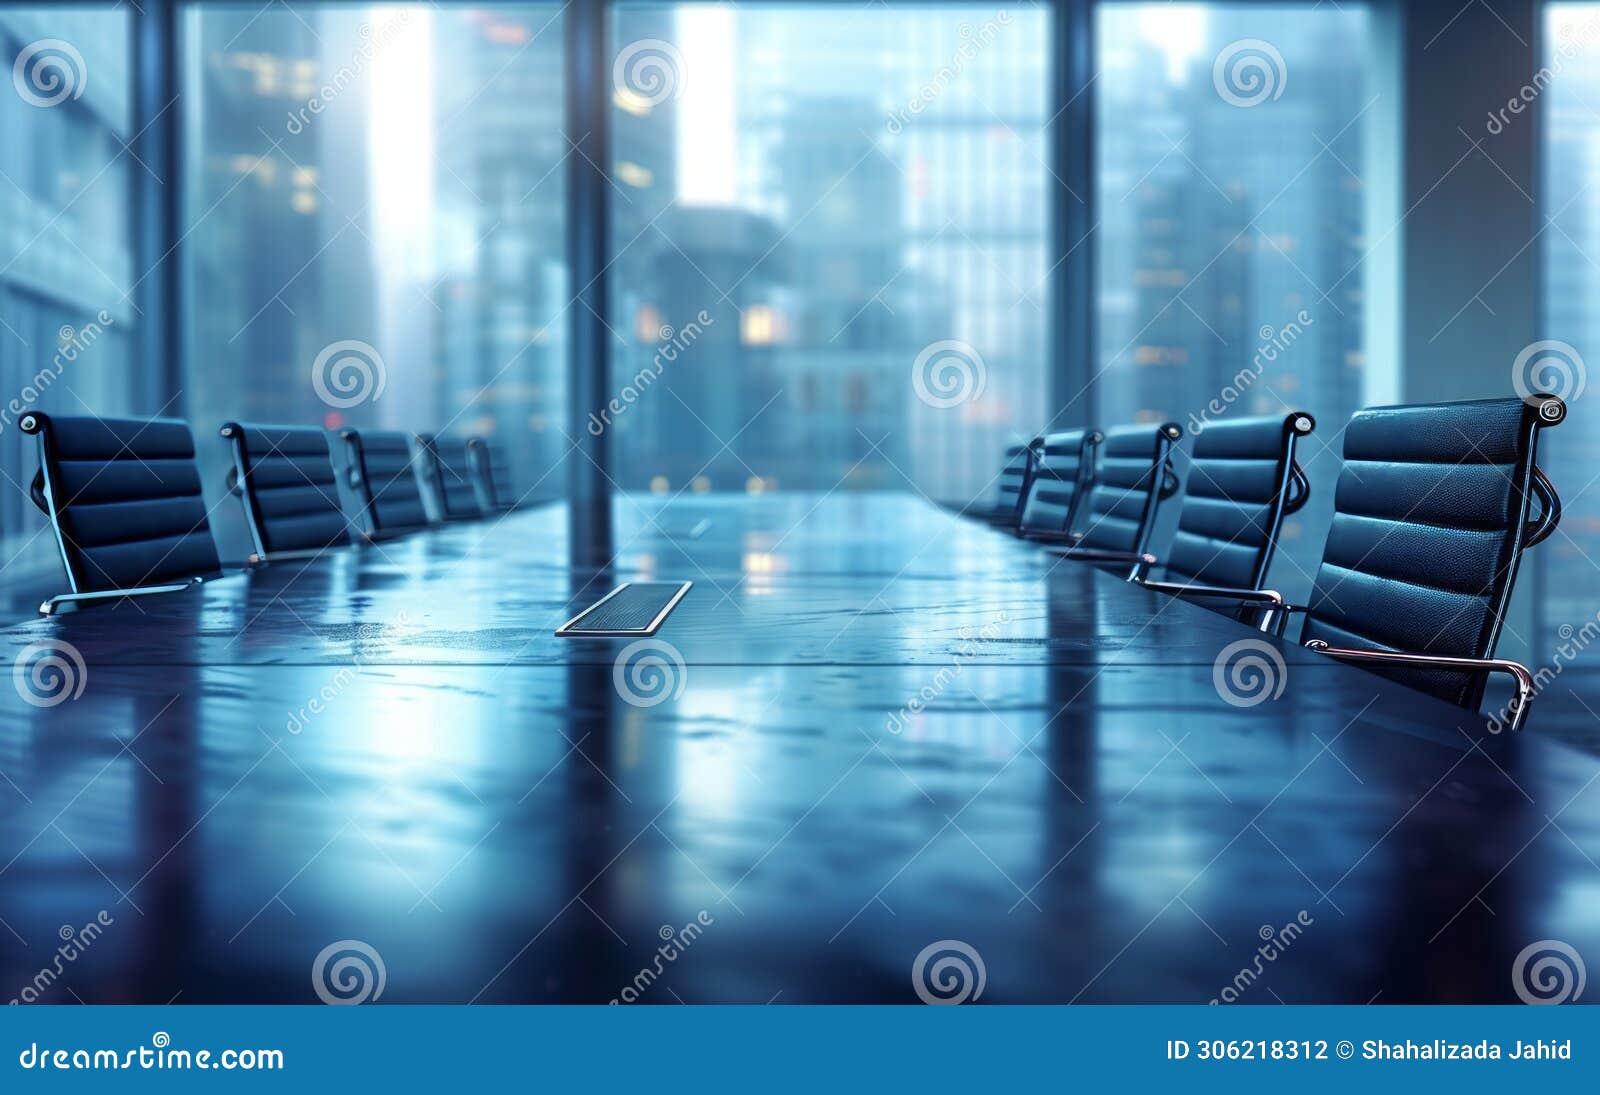 high level meeting of excutive room is decorated with stylish table and chairs around.